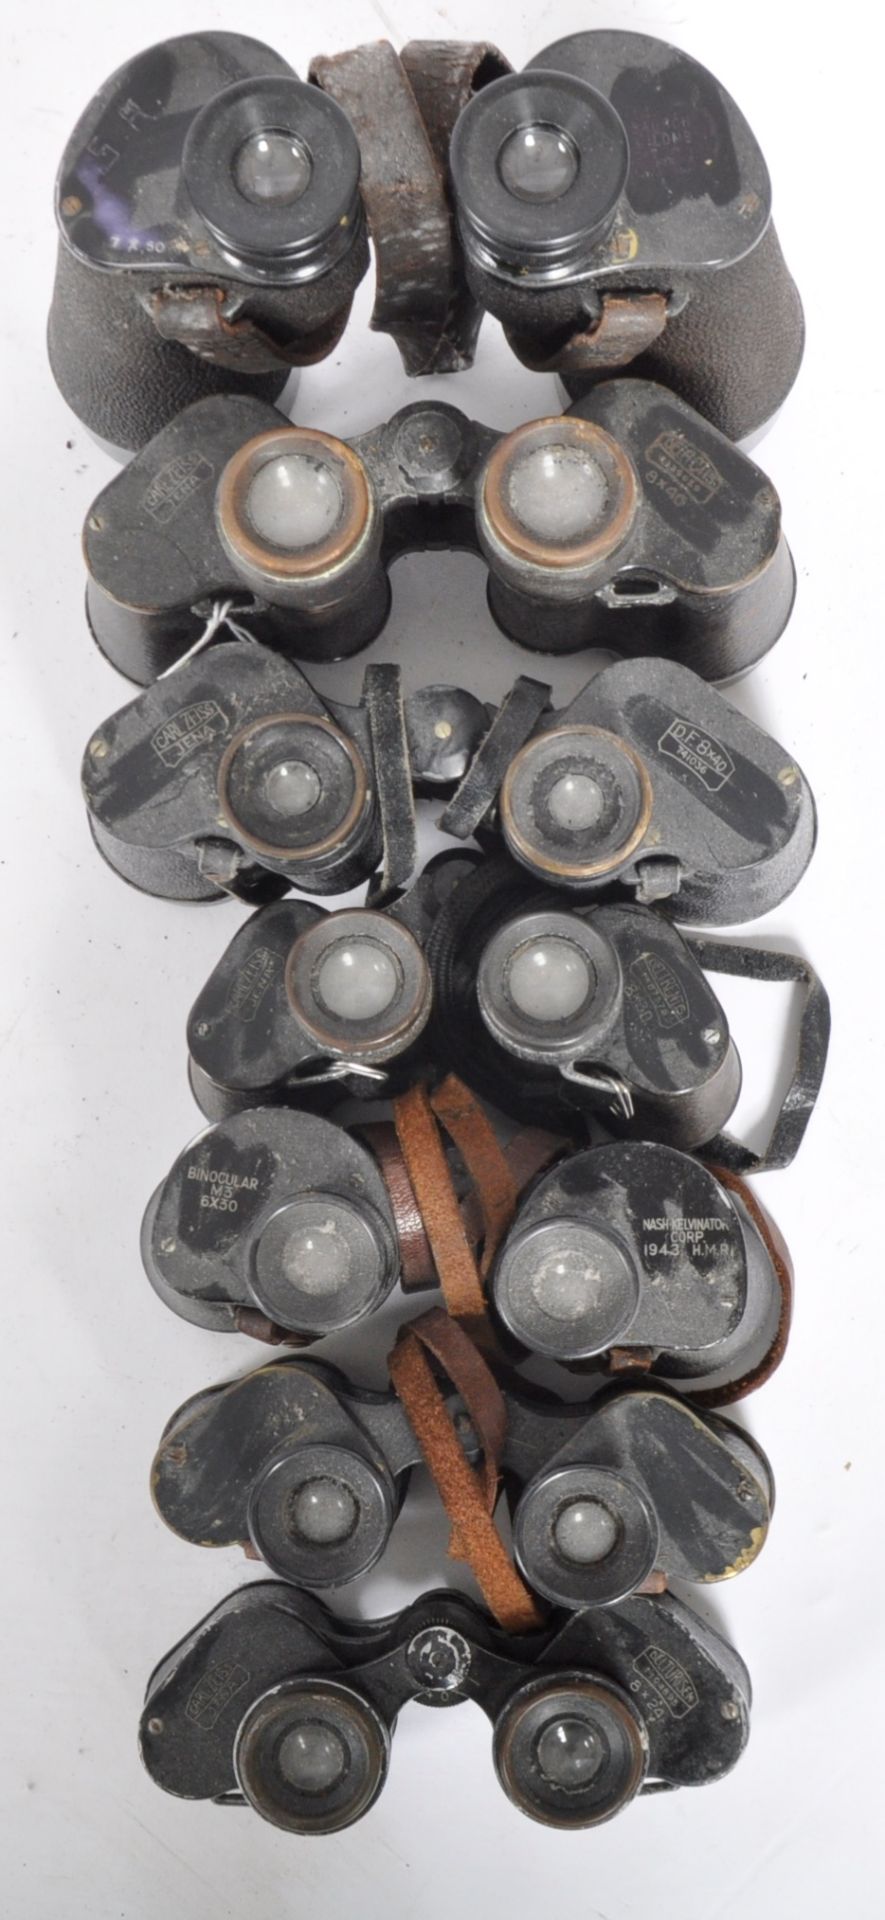 MIXED COLLECTION OF VINTAGE BINOCULARS - Image 2 of 5